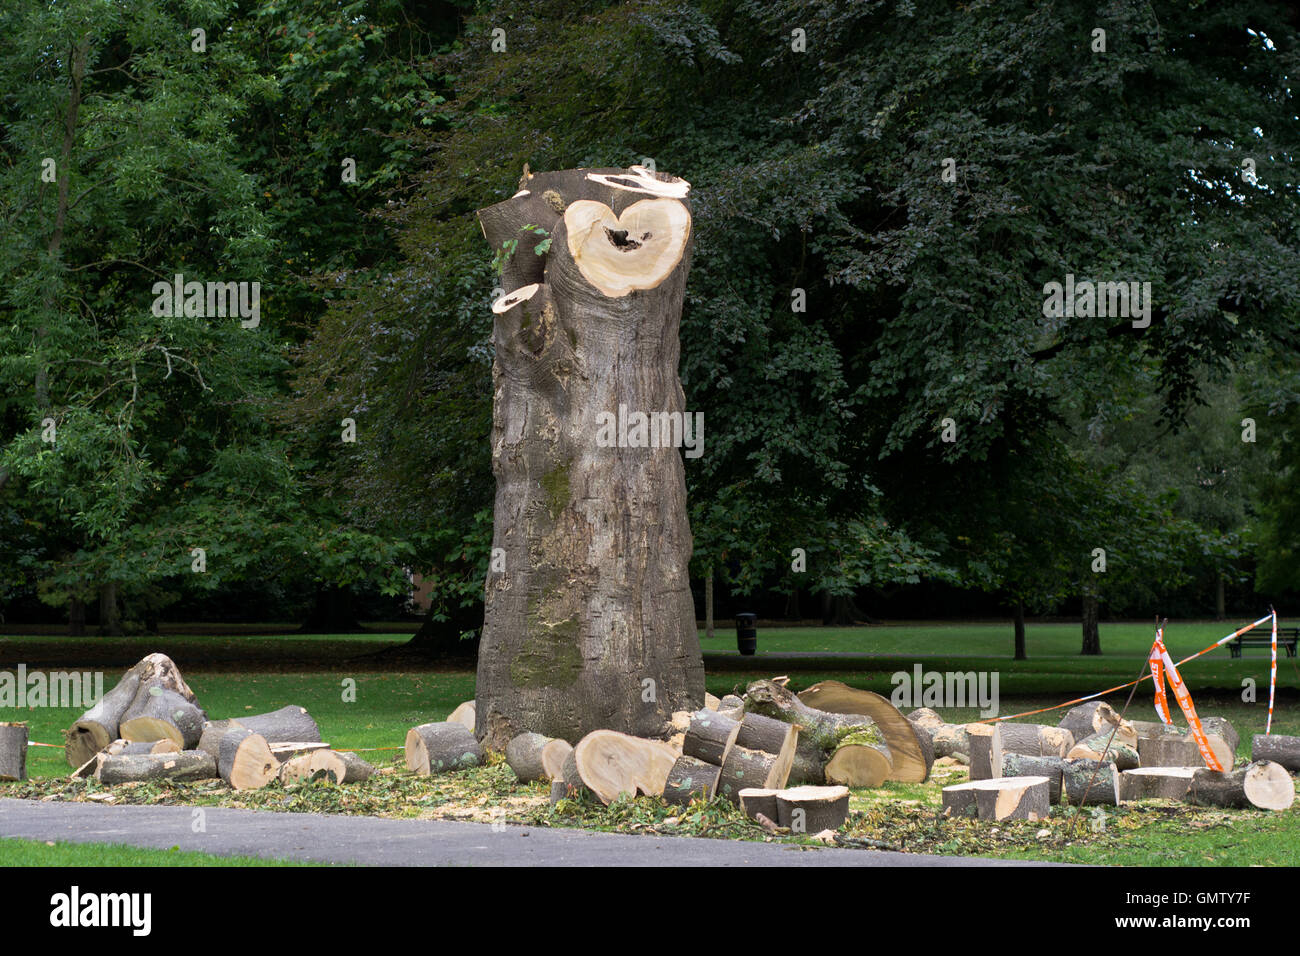 Pollarded sycamore (Acer pseudoplatanus) in park. Large mature tree felled with logs around trunk, in park in Bath, Somerset, UK Stock Photo